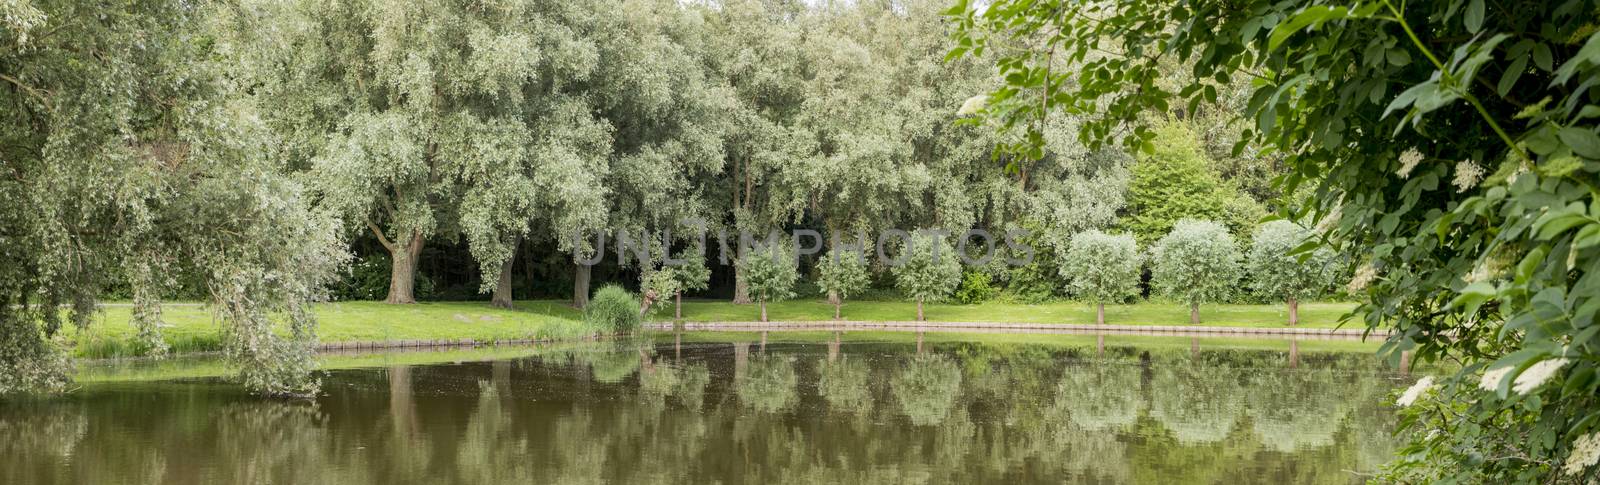 big garden in a park in holland with green trees and small pond 